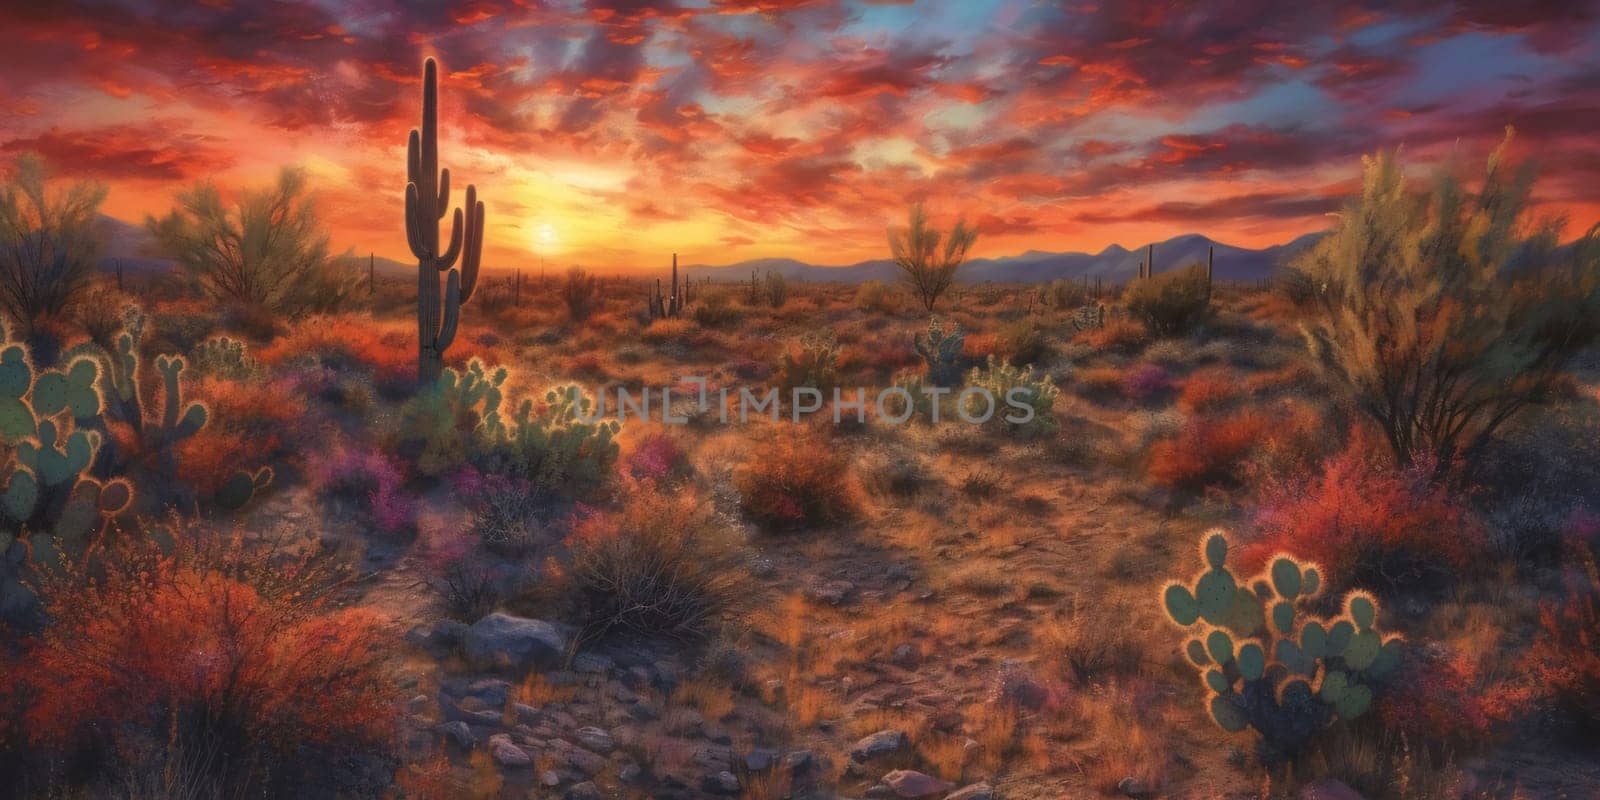 Plant called Cactus: Beautiful desert landscape with Cacti and mountains. Digital painting.